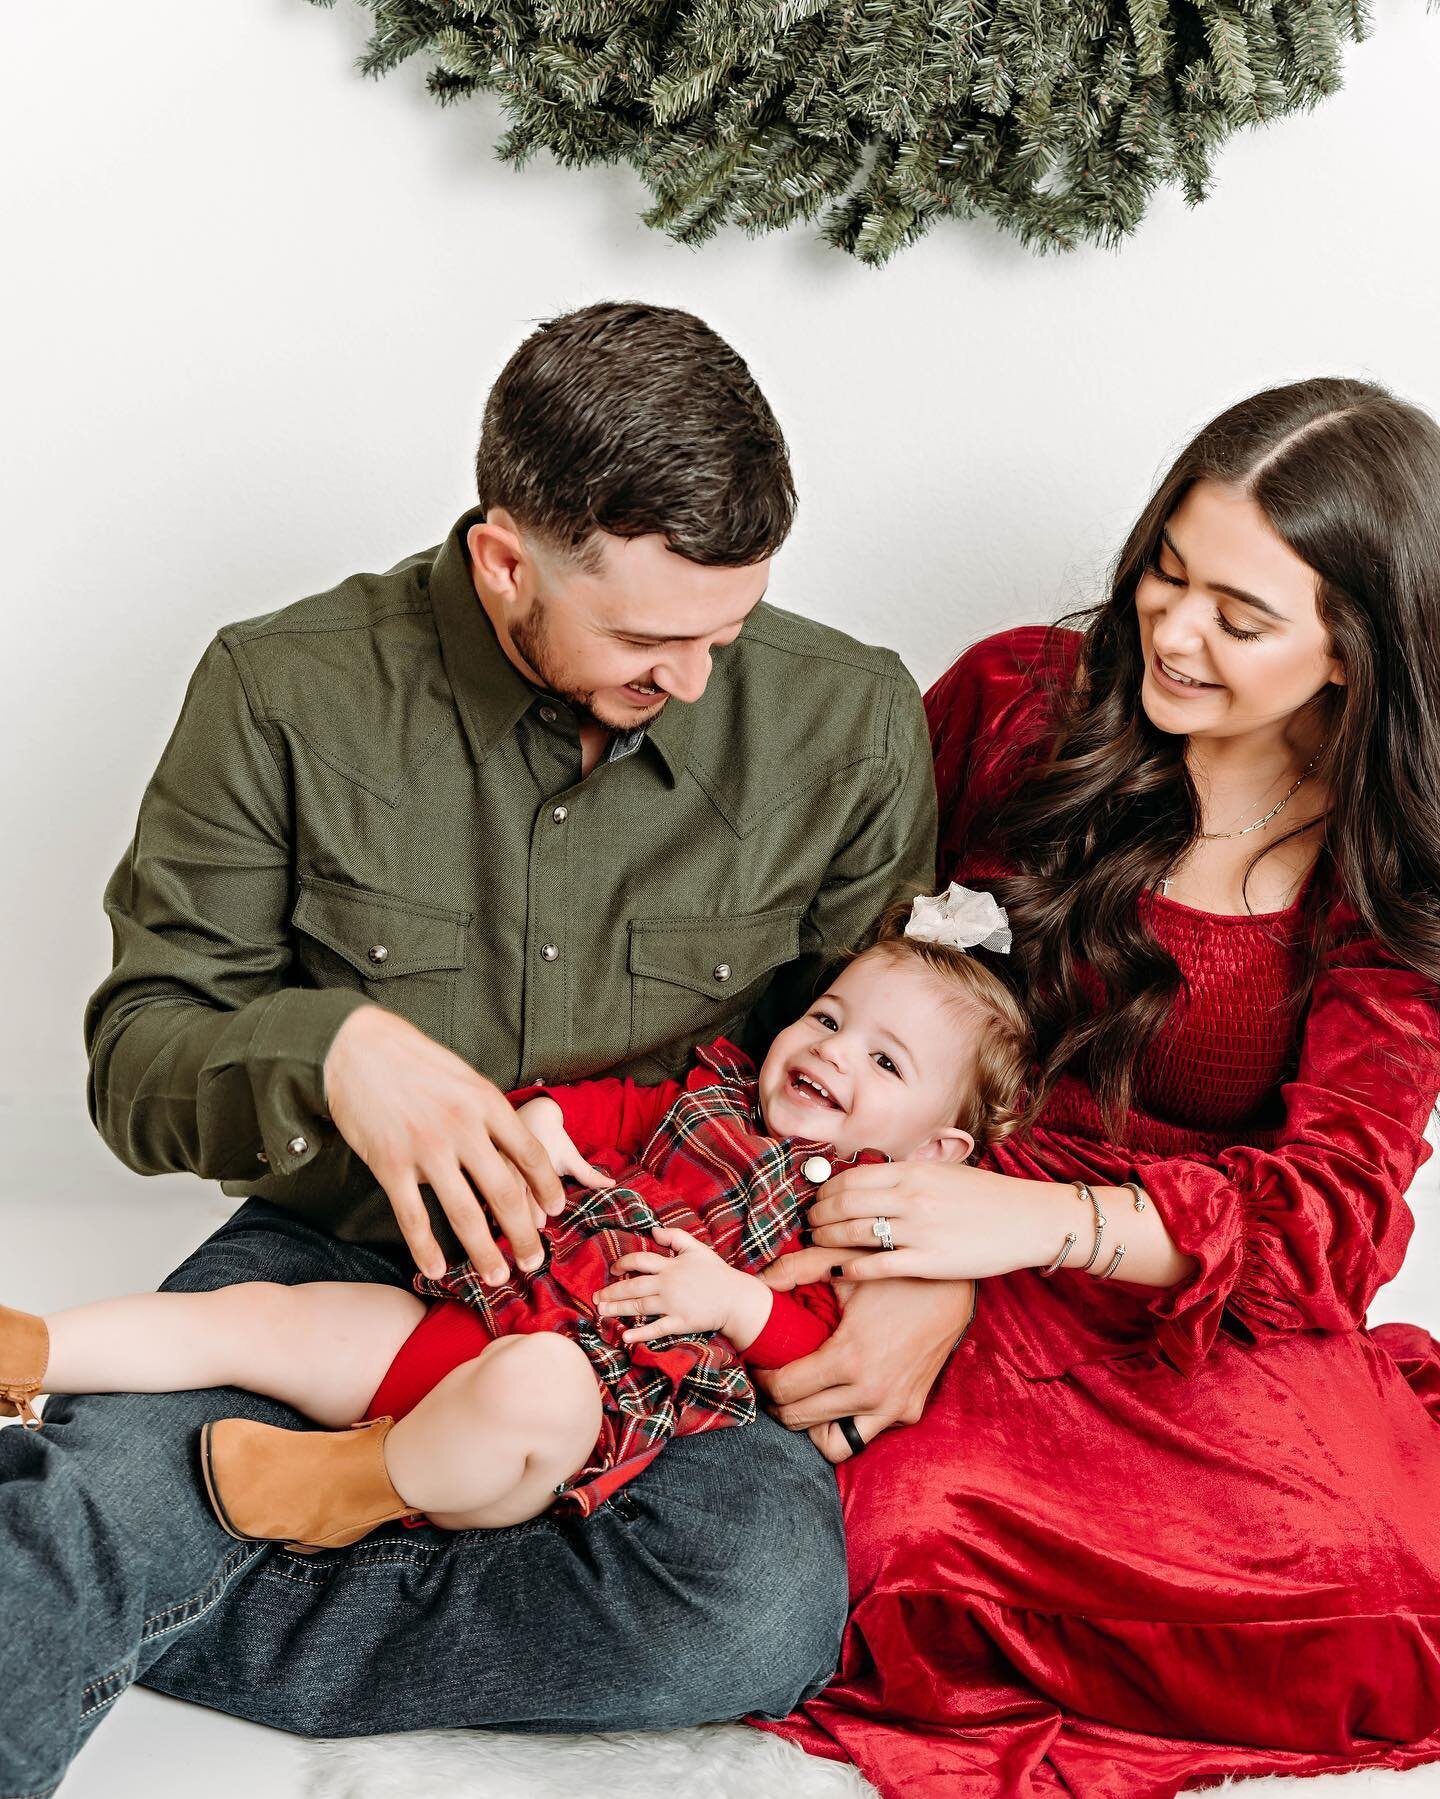 It&rsquo;s beginning to look at lot like Christmas ❤️🎄✨ 

#familypictures #christmaspics #ivfbaby #miraclebaby #husbandwife #farmerswife #sahm